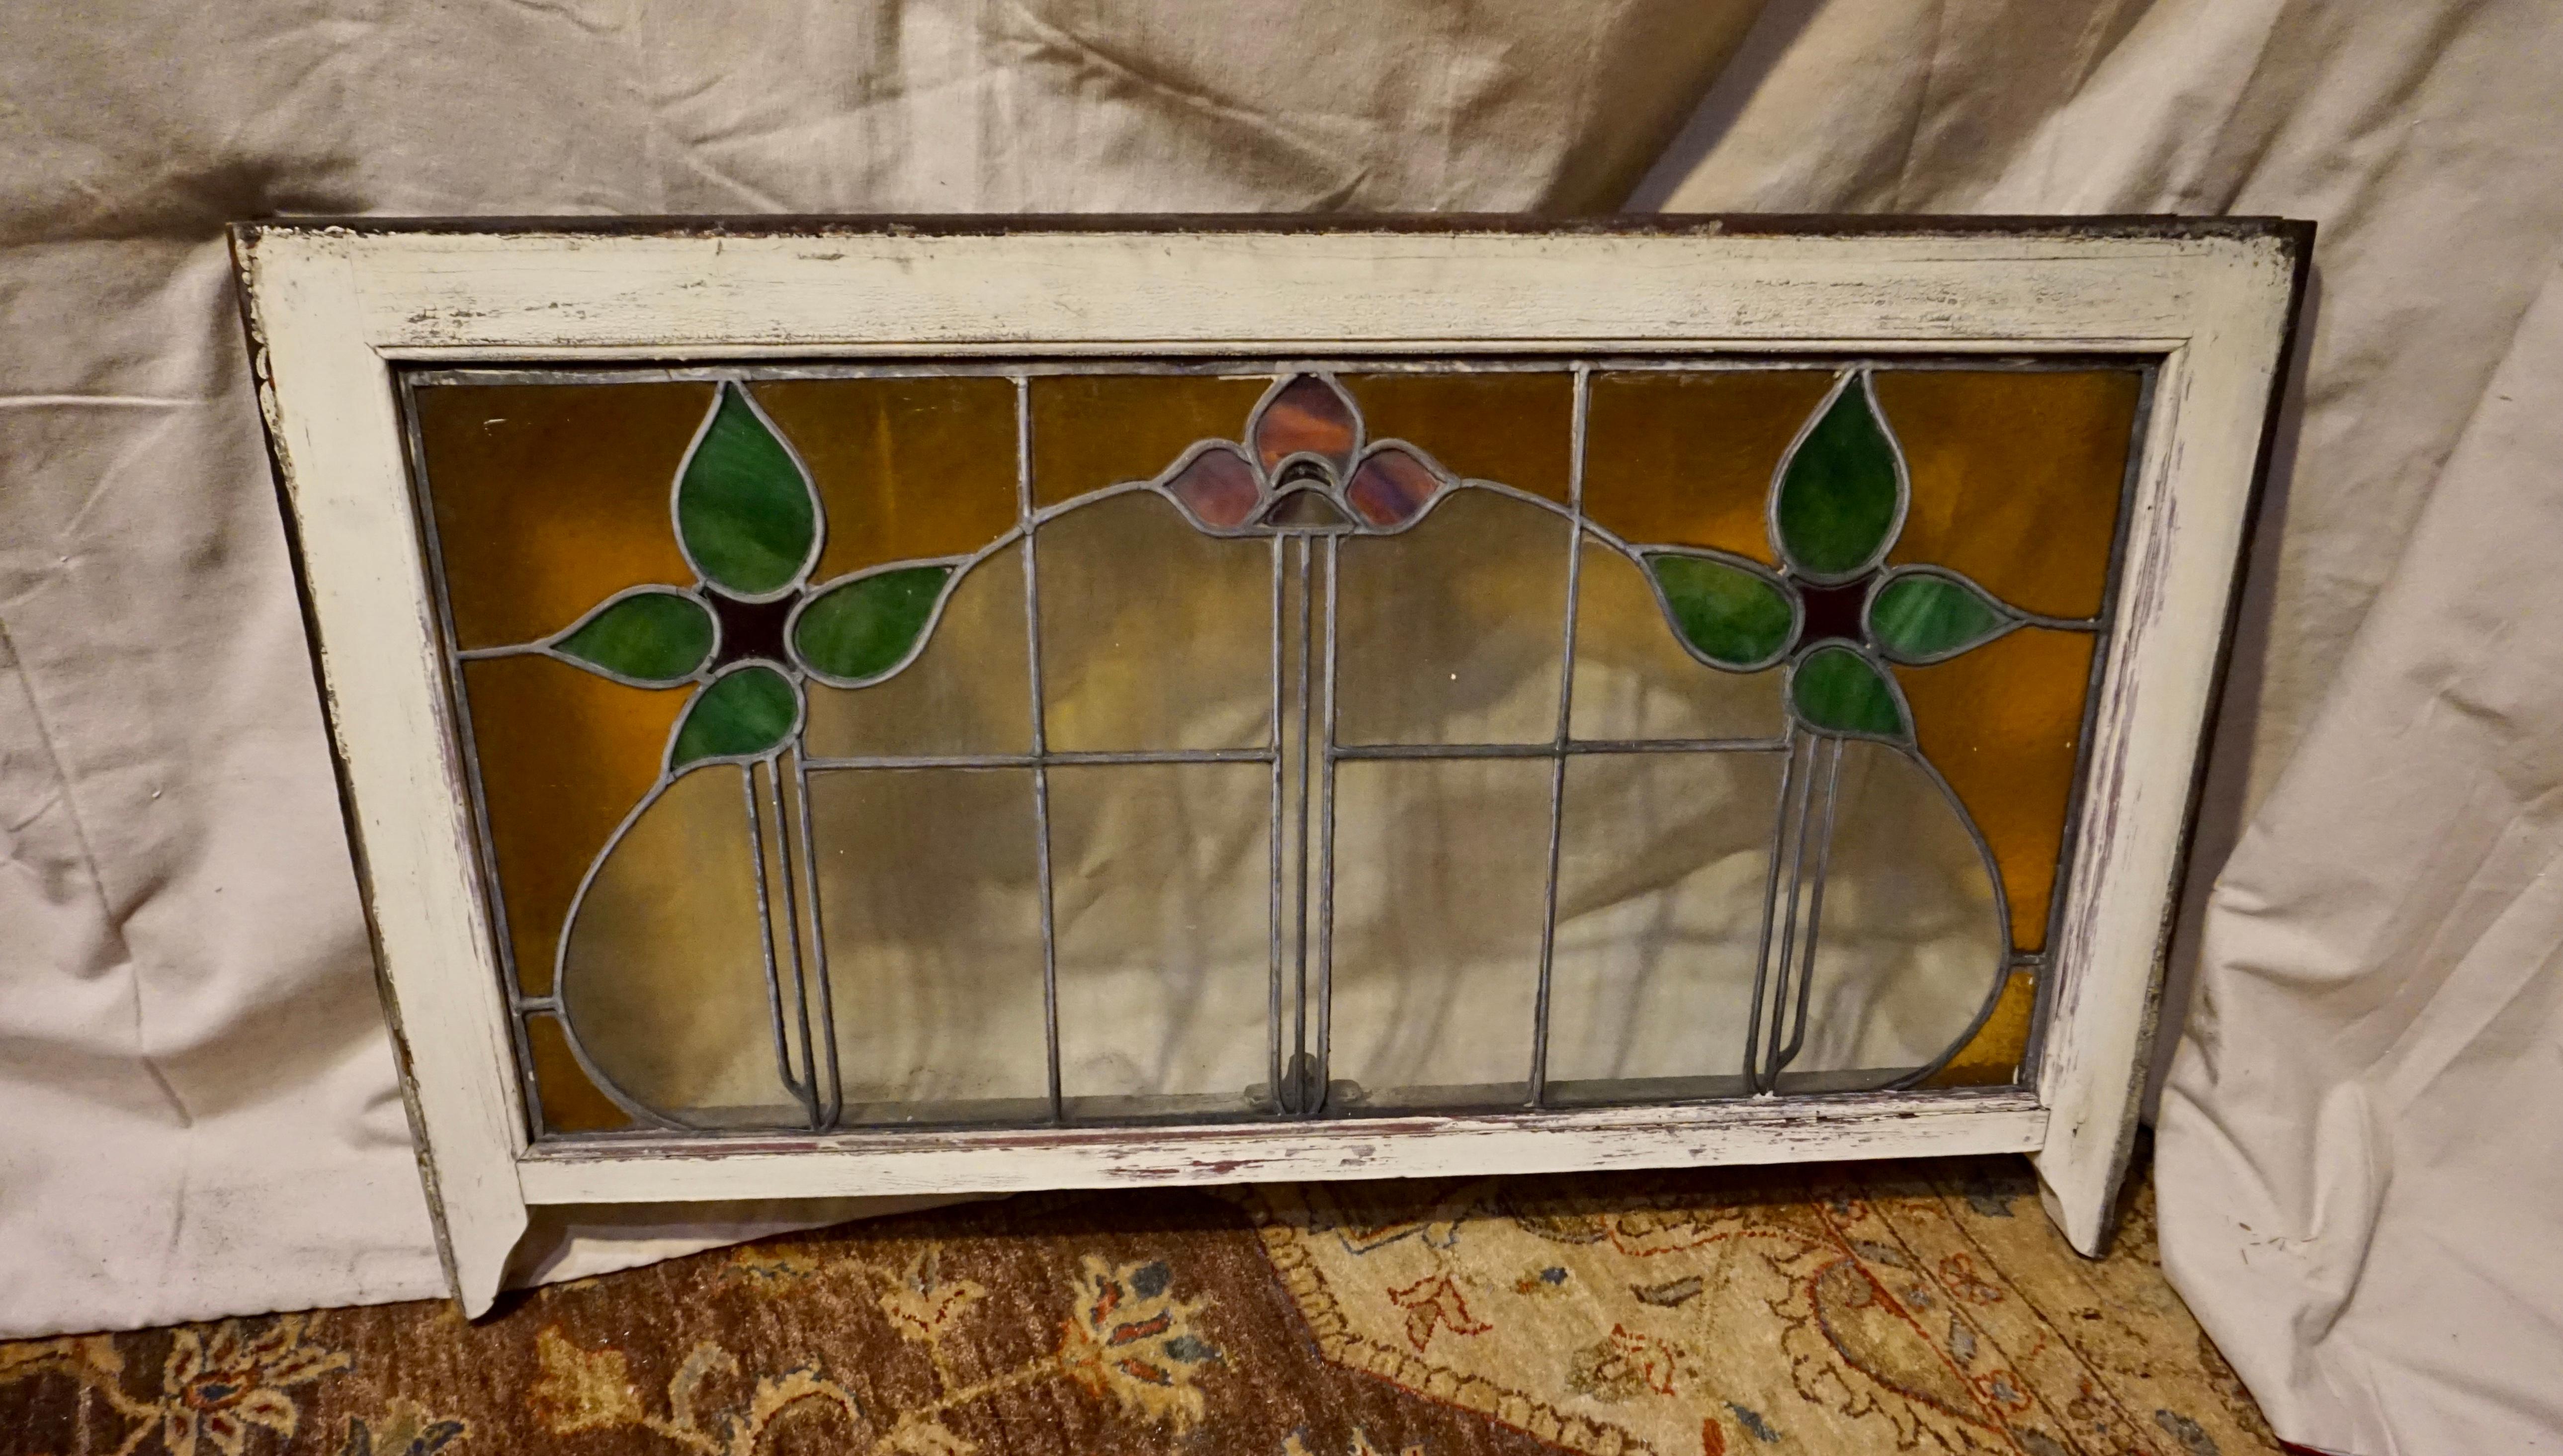 Arts & Crafts Large stained glass window circa 1900-10. Beautiful archway shape highlighted by warm floral motifs. Good original condition. This design is rare to come across and will be magnificent in the right setting.